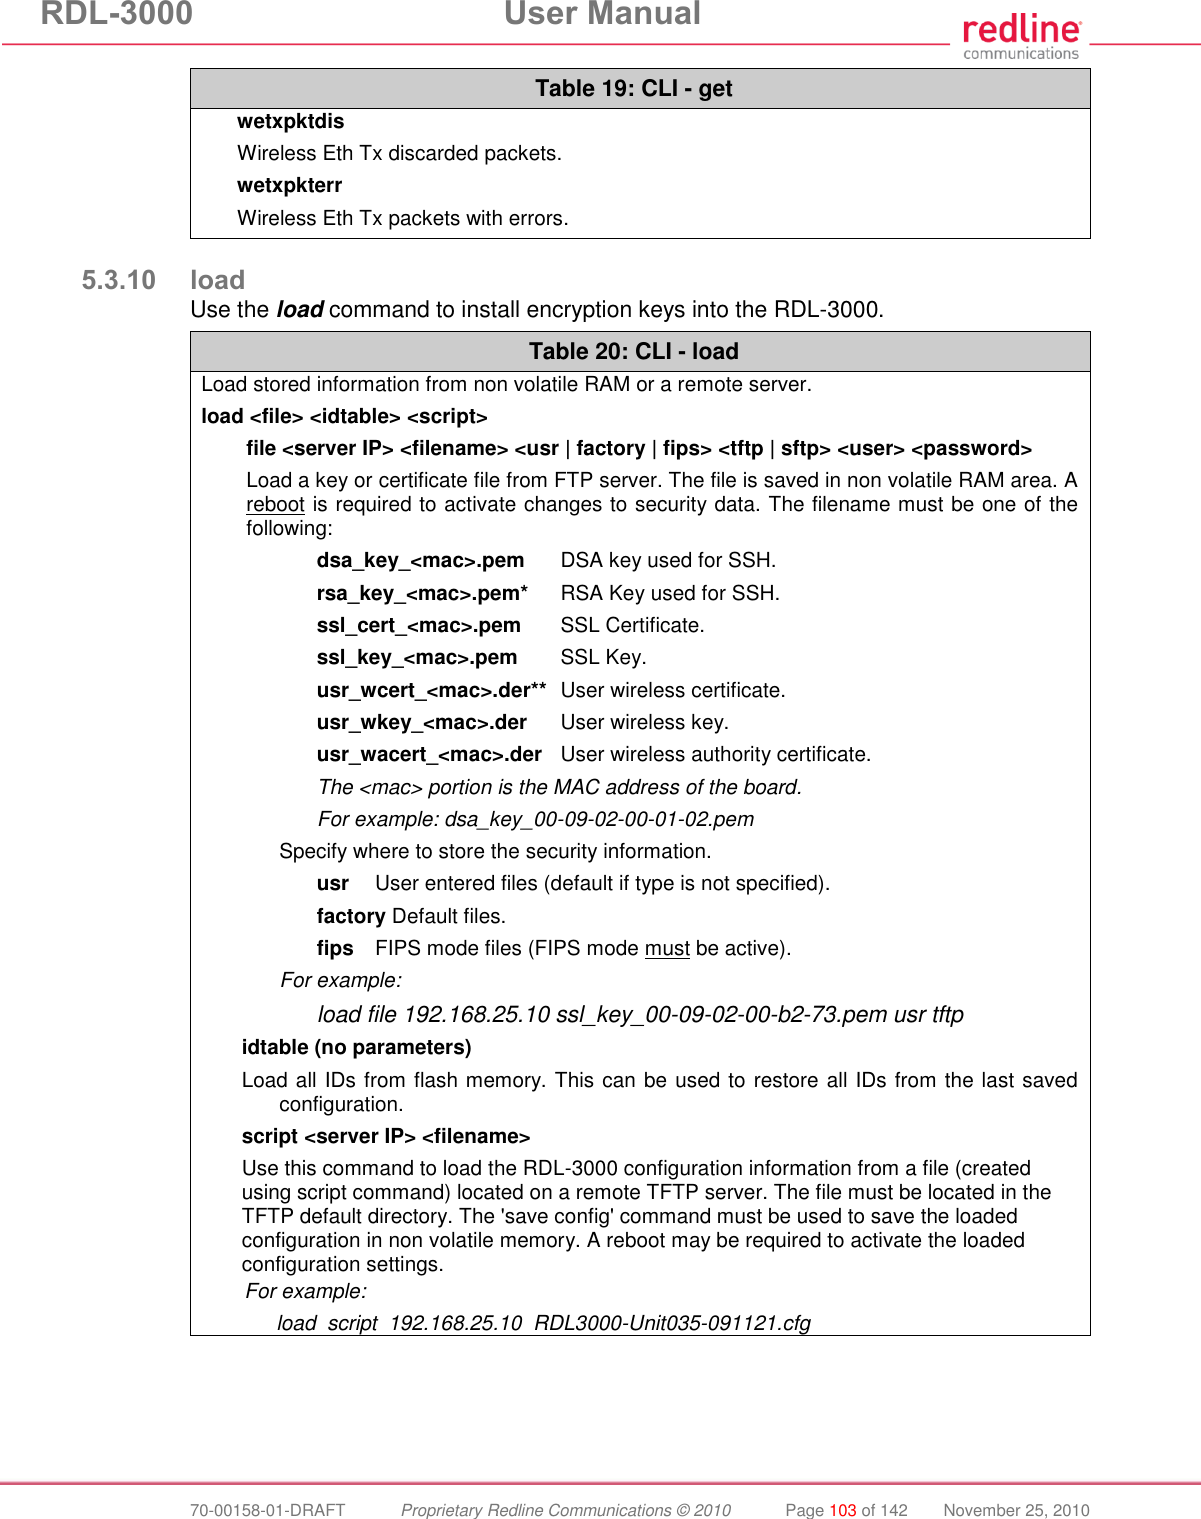 RDL-3000  User Manual  70-00158-01-DRAFT  Proprietary Redline Communications © 2010  Page 103 of 142  November 25, 2010 Table 19: CLI - get wetxpktdis Wireless Eth Tx discarded packets. wetxpkterr Wireless Eth Tx packets with errors.   5.3.10 load Use the load command to install encryption keys into the RDL-3000. Table 20: CLI - load Load stored information from non volatile RAM or a remote server.  load &lt;file&gt; &lt;idtable&gt; &lt;script&gt; file &lt;server IP&gt; &lt;filename&gt; &lt;usr | factory | fips&gt; &lt;tftp | sftp&gt; &lt;user&gt; &lt;password&gt; Load a key or certificate file from FTP server. The file is saved in non volatile RAM area. A reboot is required to activate changes to security data. The filename must be one of the following:  dsa_key_&lt;mac&gt;.pem  DSA key used for SSH.  rsa_key_&lt;mac&gt;.pem*  RSA Key used for SSH.  ssl_cert_&lt;mac&gt;.pem  SSL Certificate.  ssl_key_&lt;mac&gt;.pem  SSL Key.  usr_wcert_&lt;mac&gt;.der**  User wireless certificate.  usr_wkey_&lt;mac&gt;.der  User wireless key.  usr_wacert_&lt;mac&gt;.der  User wireless authority certificate.  The &lt;mac&gt; portion is the MAC address of the board.   For example: dsa_key_00-09-02-00-01-02.pem Specify where to store the security information.  usr  User entered files (default if type is not specified).  factory Default files.  fips  FIPS mode files (FIPS mode must be active).   For example:   load file 192.168.25.10 ssl_key_00-09-02-00-b2-73.pem usr tftp idtable (no parameters) Load all IDs from flash memory. This can be used to restore all IDs from the last saved configuration. script &lt;server IP&gt; &lt;filename&gt; Use this command to load the RDL-3000 configuration information from a file (created using script command) located on a remote TFTP server. The file must be located in the TFTP default directory. The &apos;save config&apos; command must be used to save the loaded configuration in non volatile memory. A reboot may be required to activate the loaded configuration settings. For example:    load  script  192.168.25.10  RDL3000-Unit035-091121.cfg  